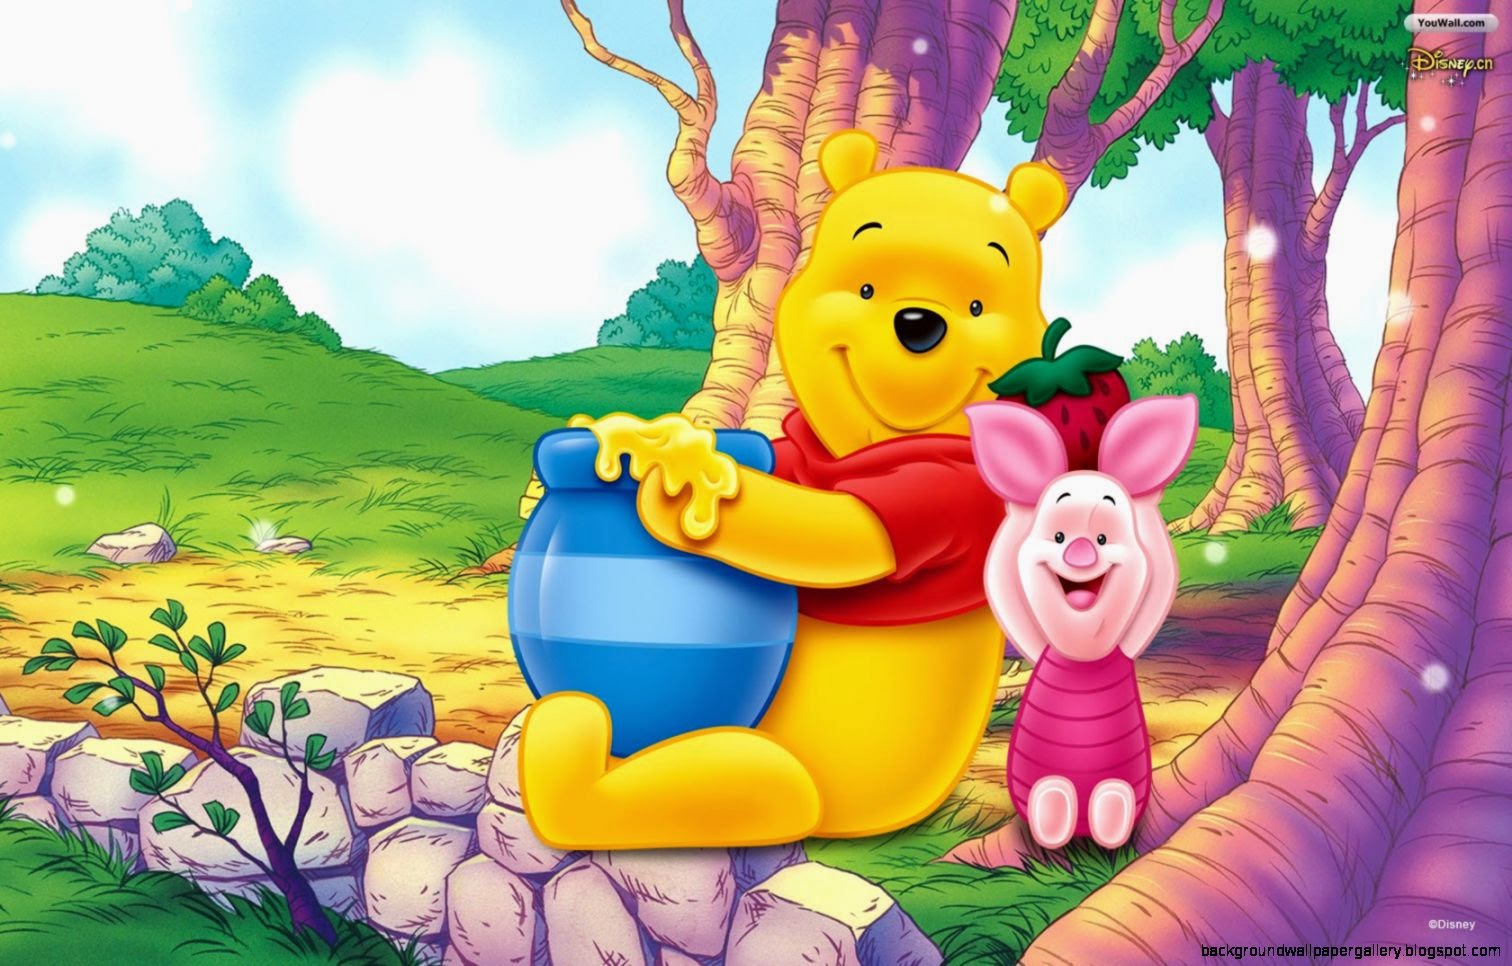 Winnie Pooh Wallpaper Free For Desktop Cartoons Images - High Resolution Winnie The Pooh , HD Wallpaper & Backgrounds